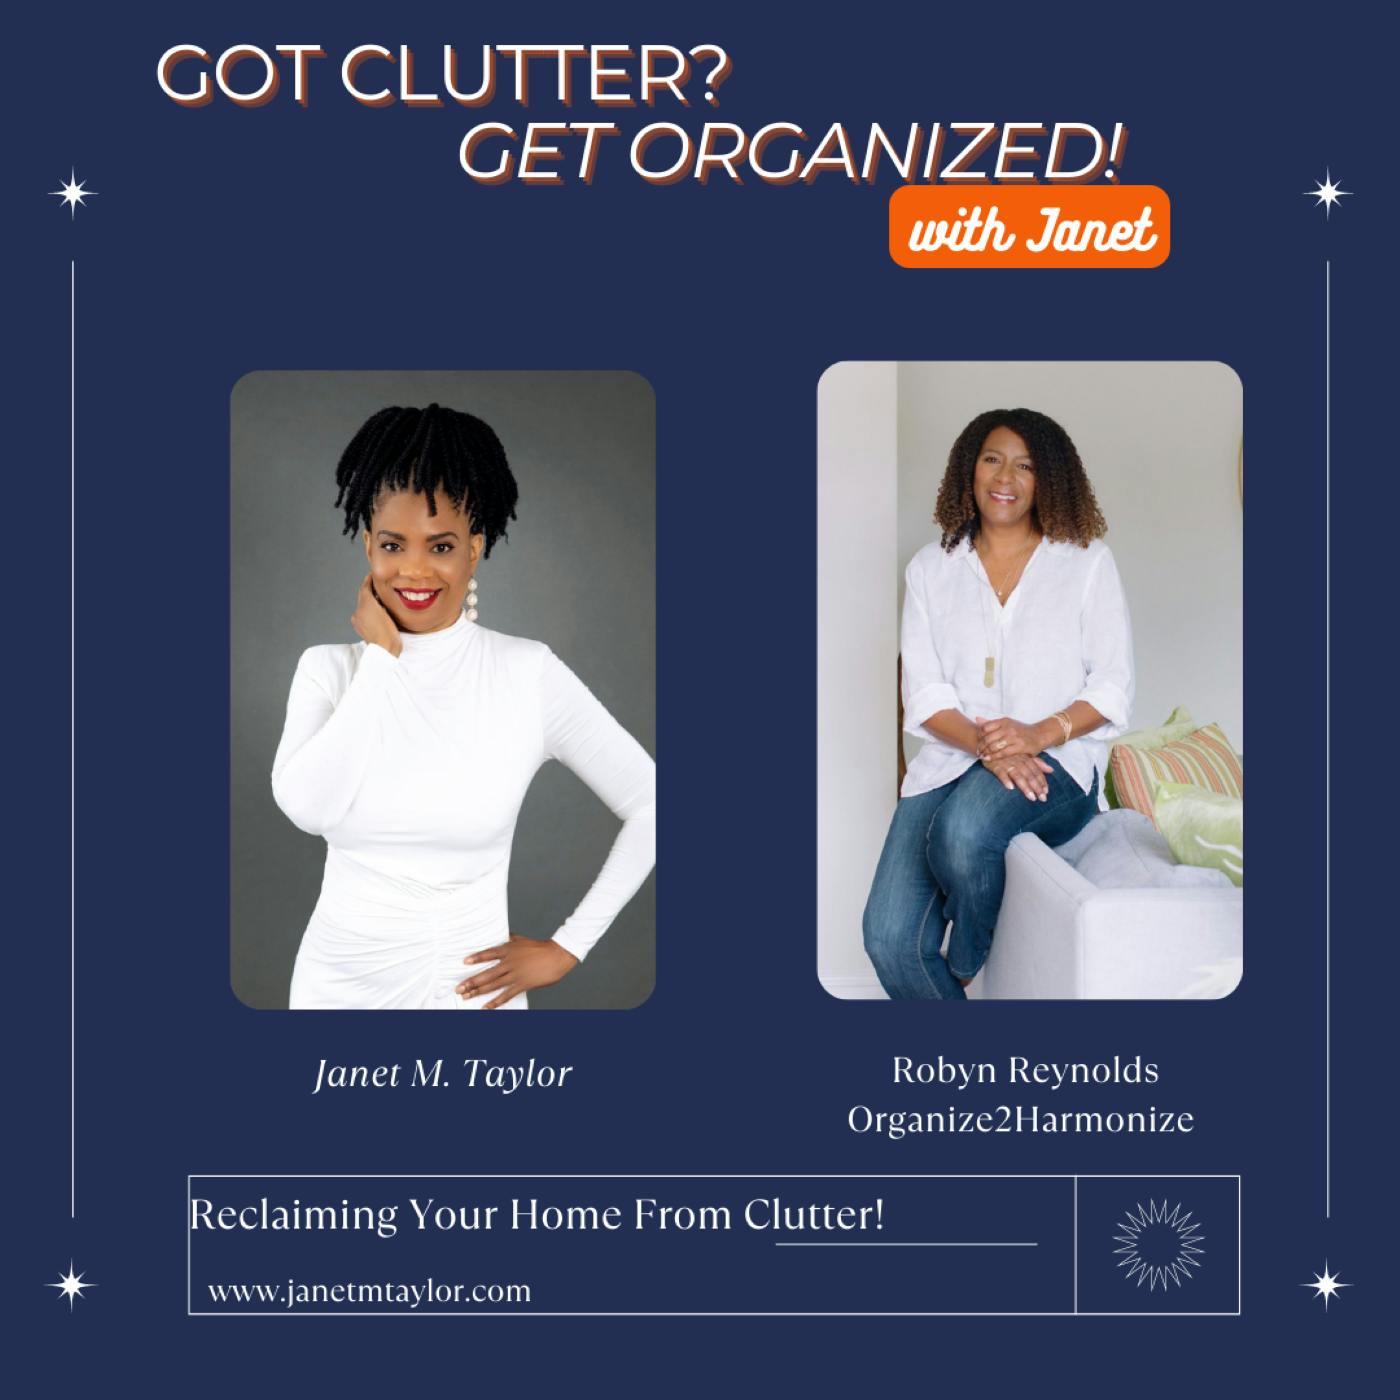 Reclaiming Your Home From Clutter with Robyn Reynolds, Organize2Harmonize